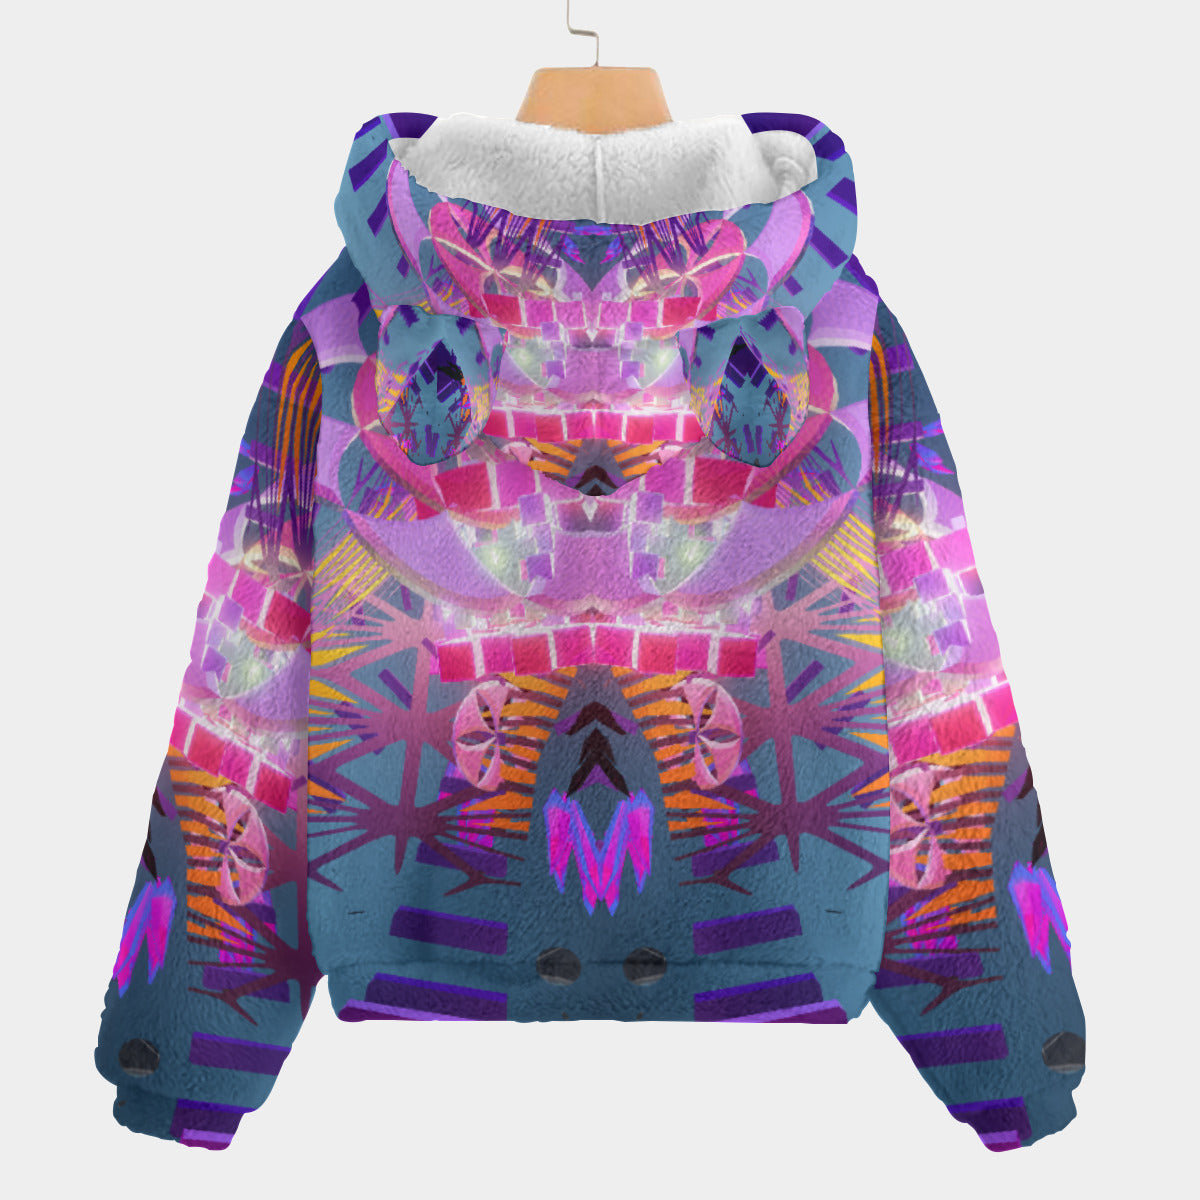 Psychedelic All-Over MicrodoseVR Print Kid’s Borg Fleece Sweatshirt With Ears